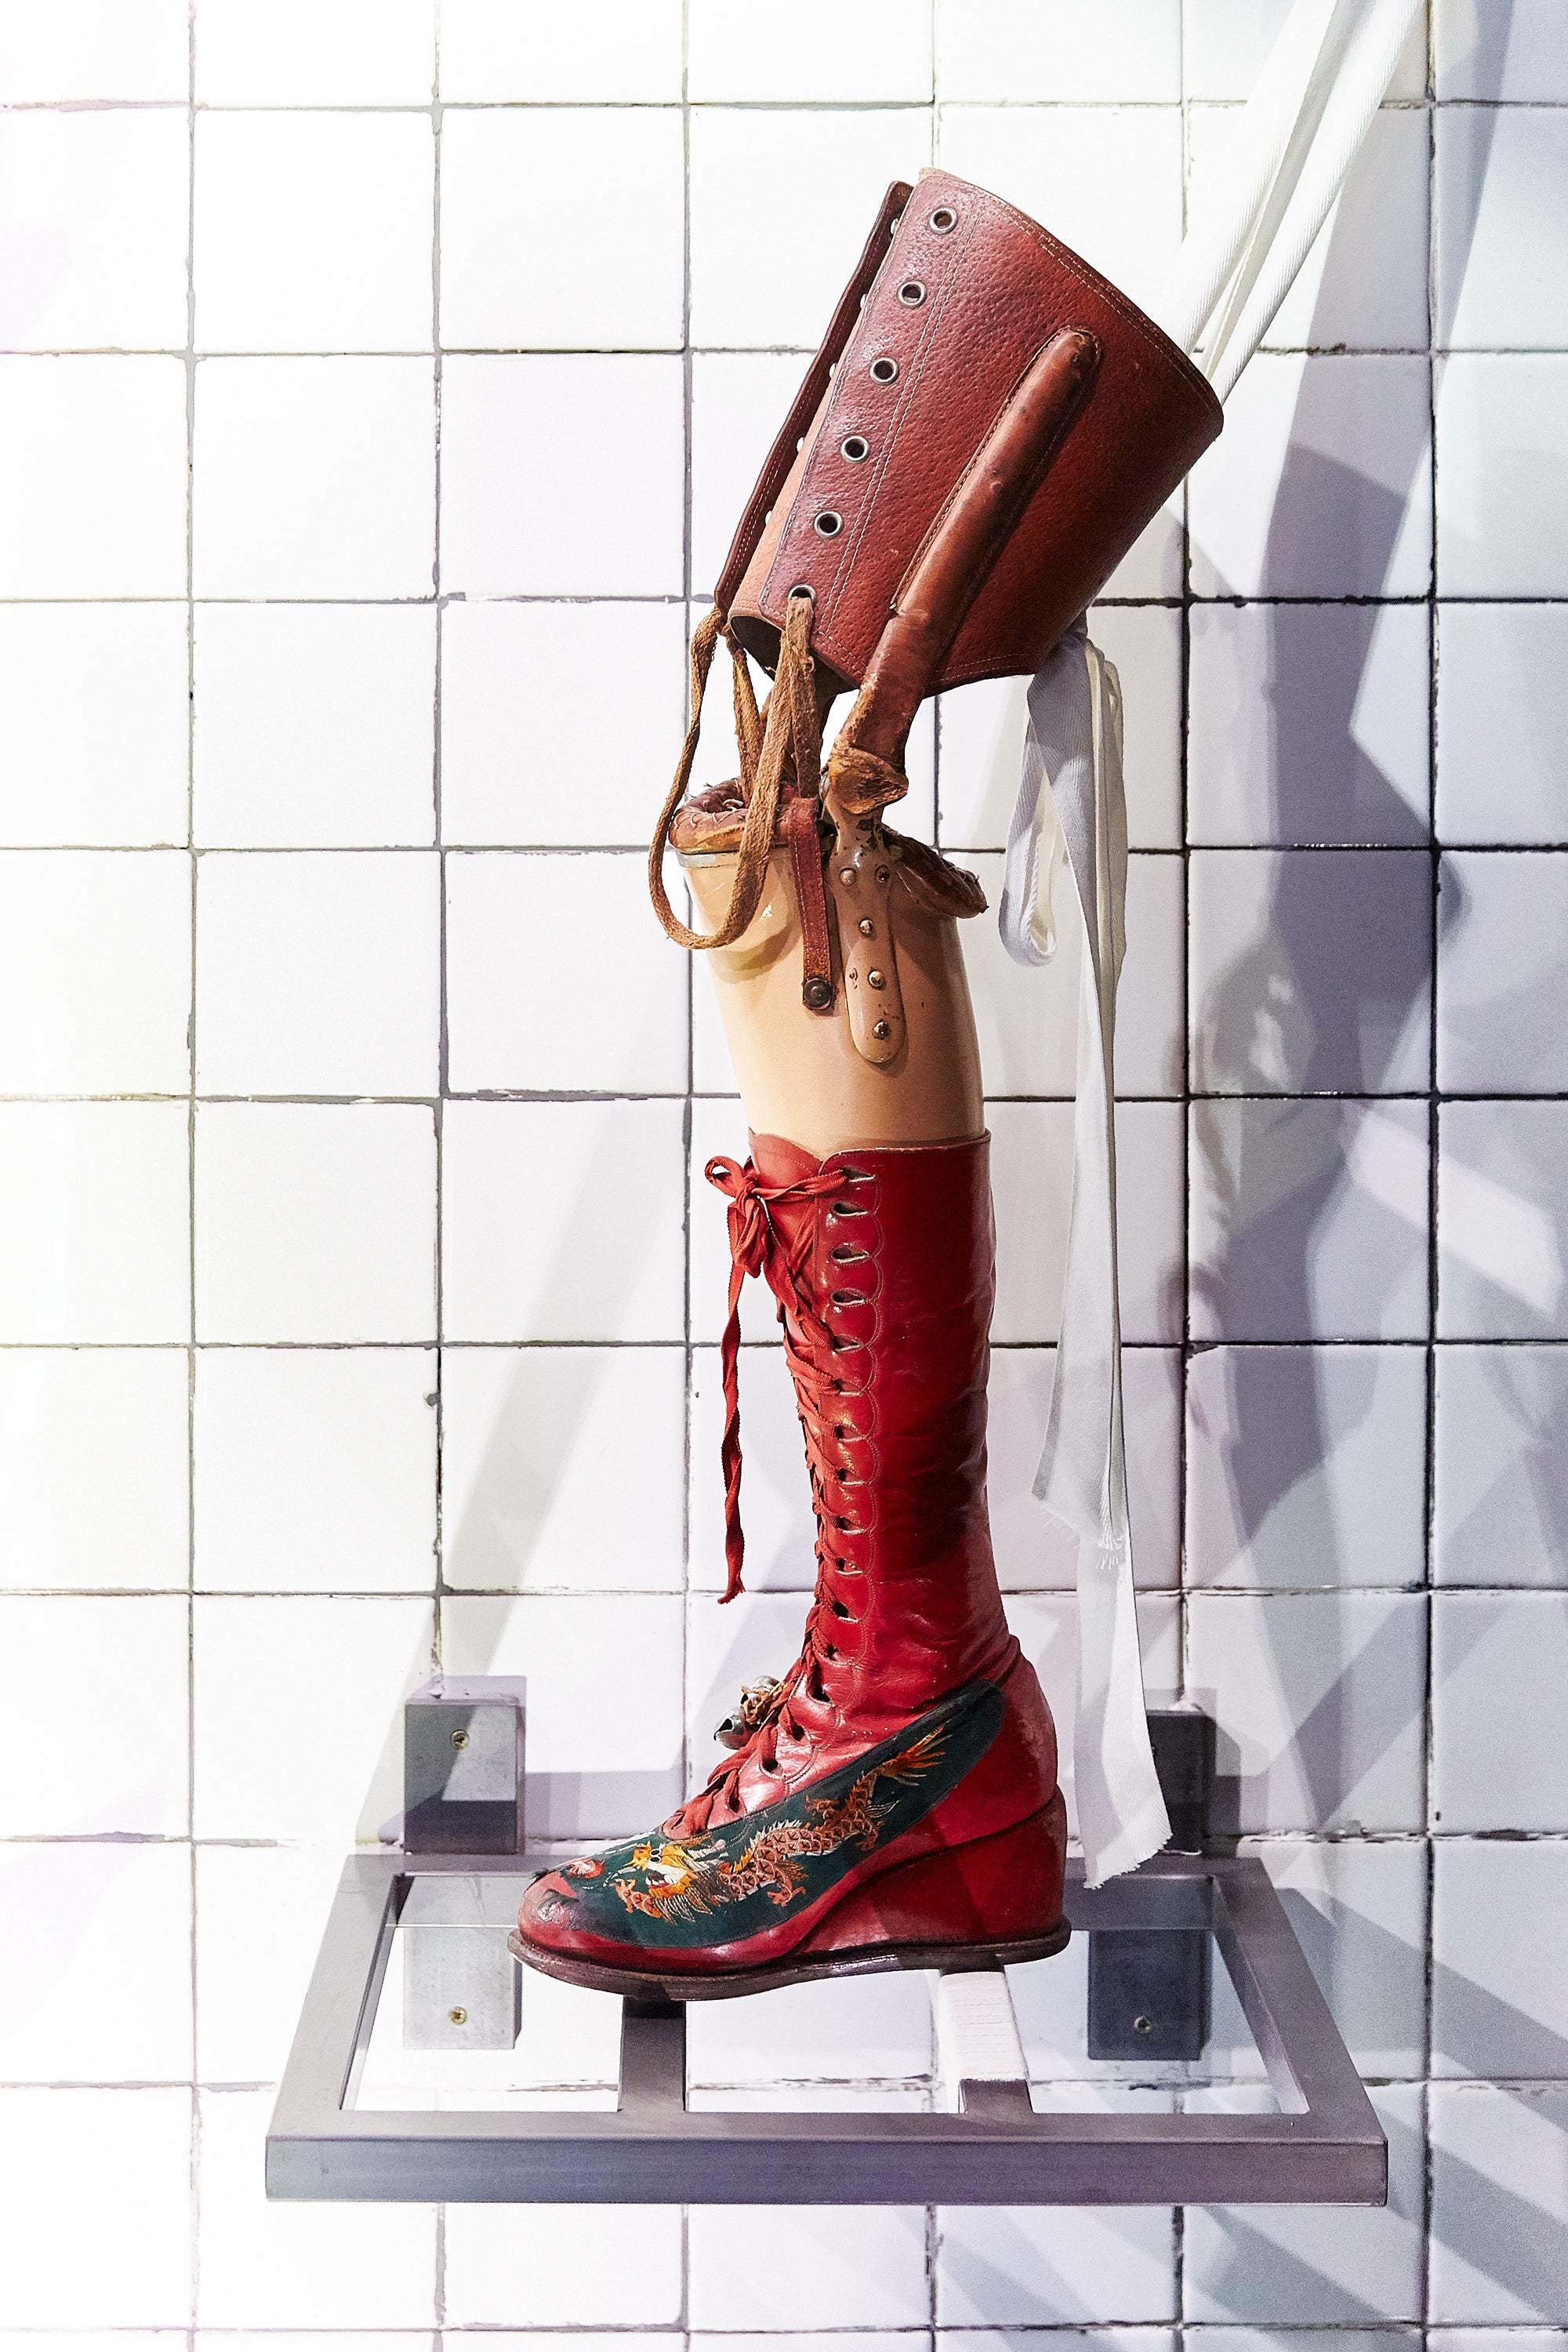 Frida’s Red Boot